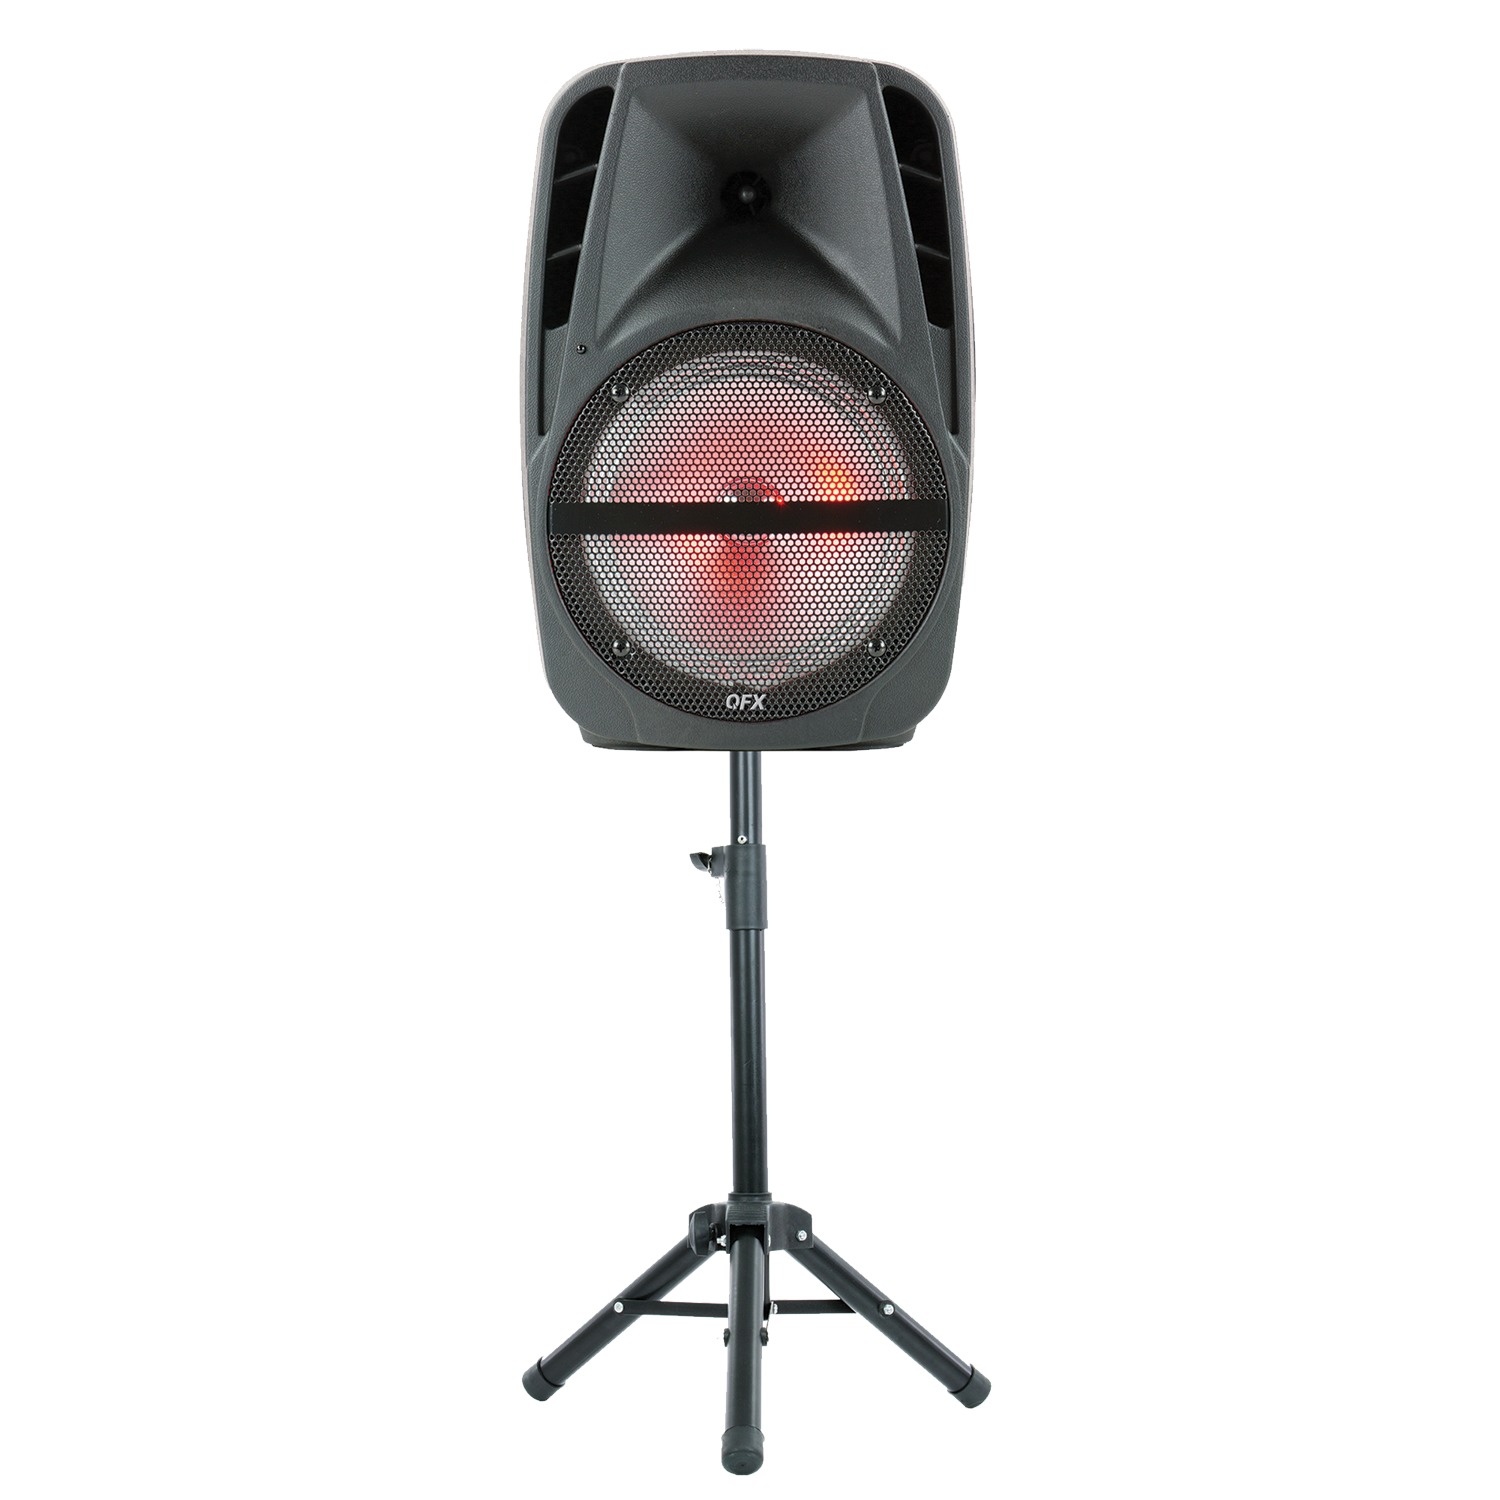 Qfx 15-inch Portable Party Speaker With Microphone And Stand - image 1 of 2